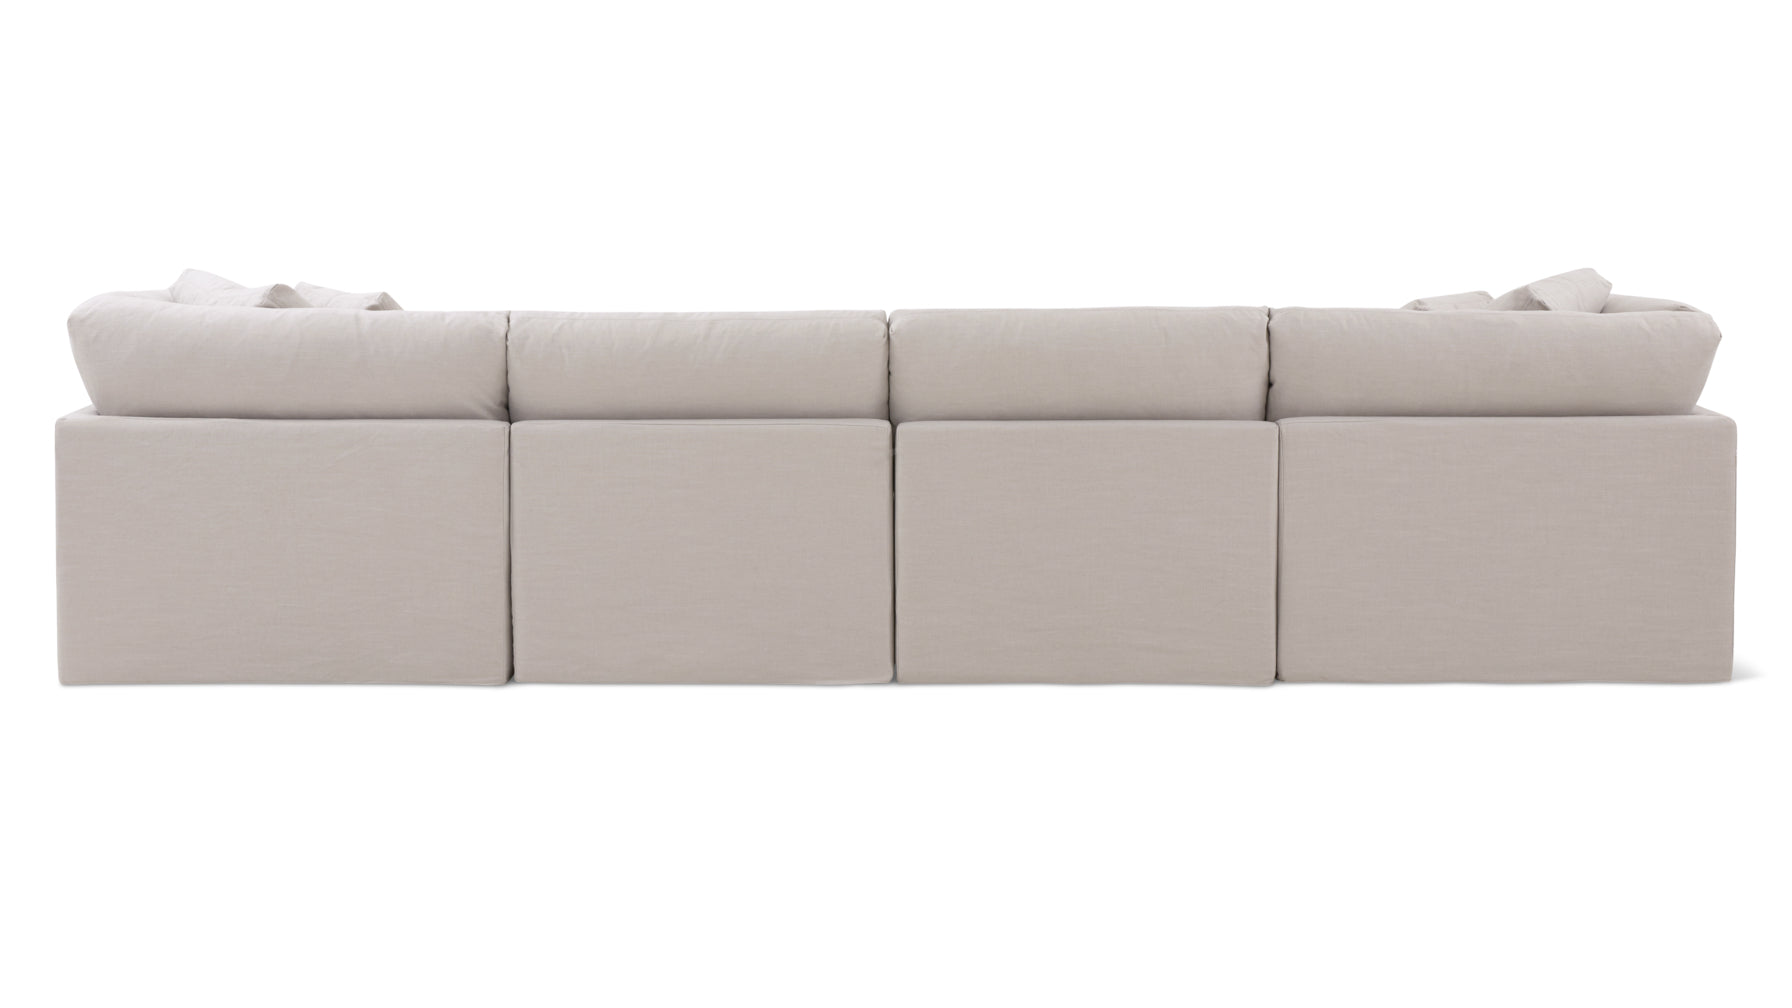 Get Together™ 6-Piece Modular U-Shaped Sectional, Large, Clay - Image 7